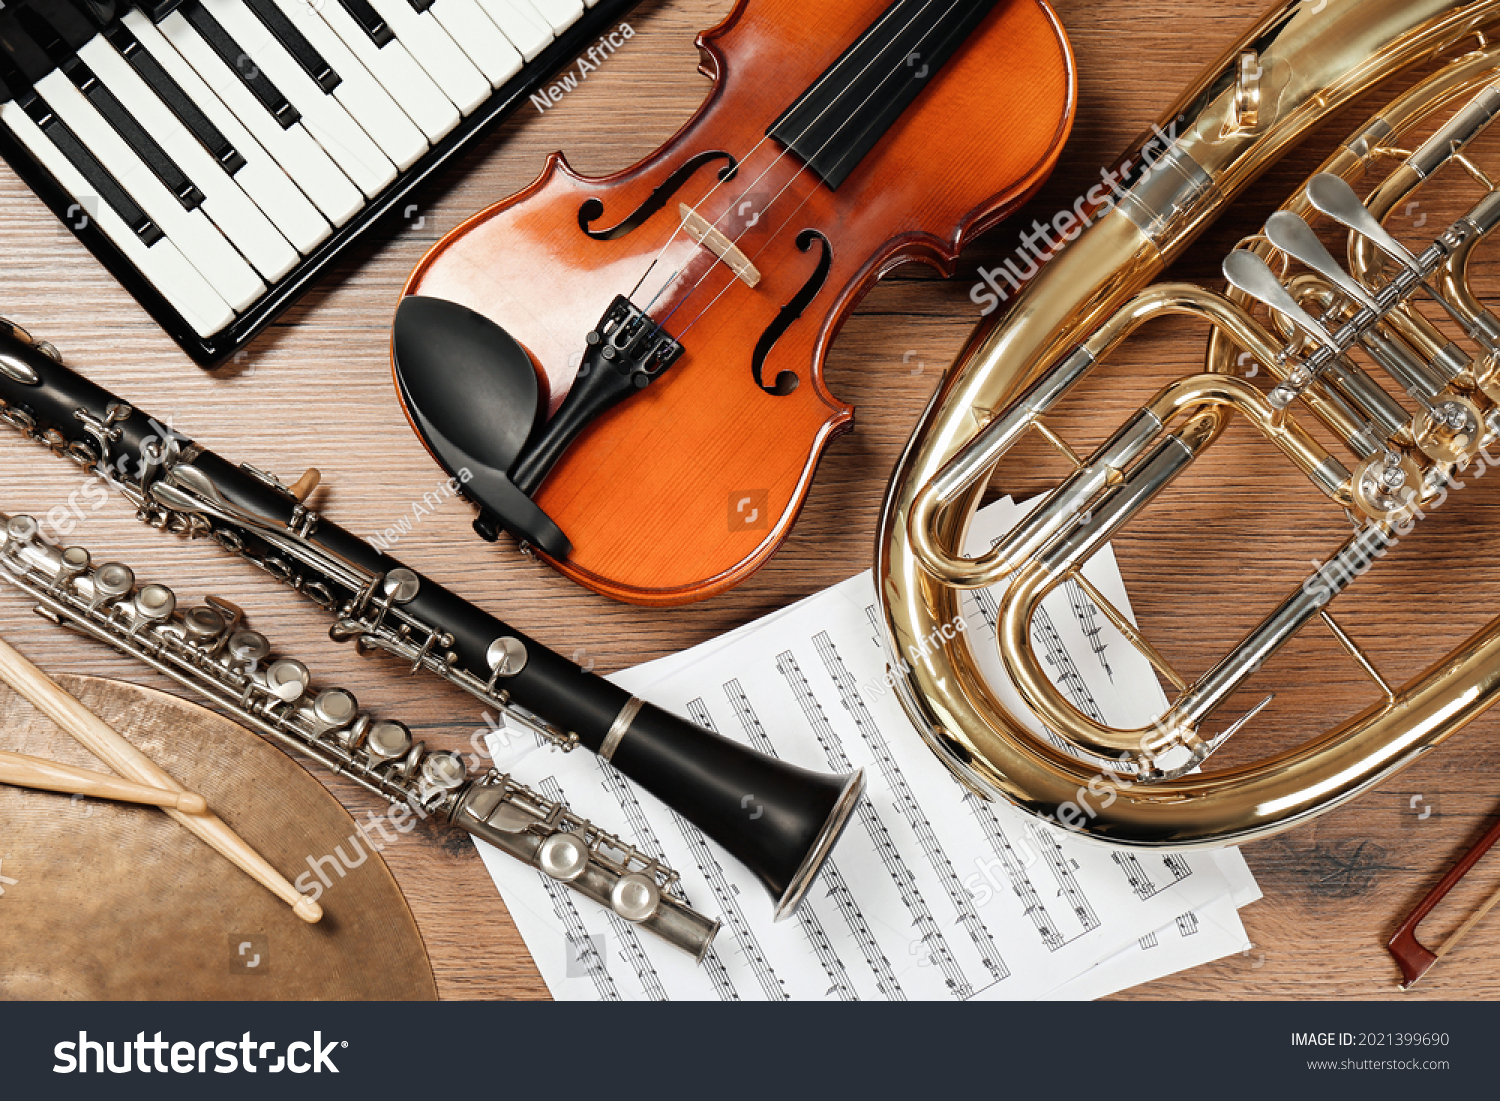 Set of different musical instruments on wooden background, flat lay #2021399690